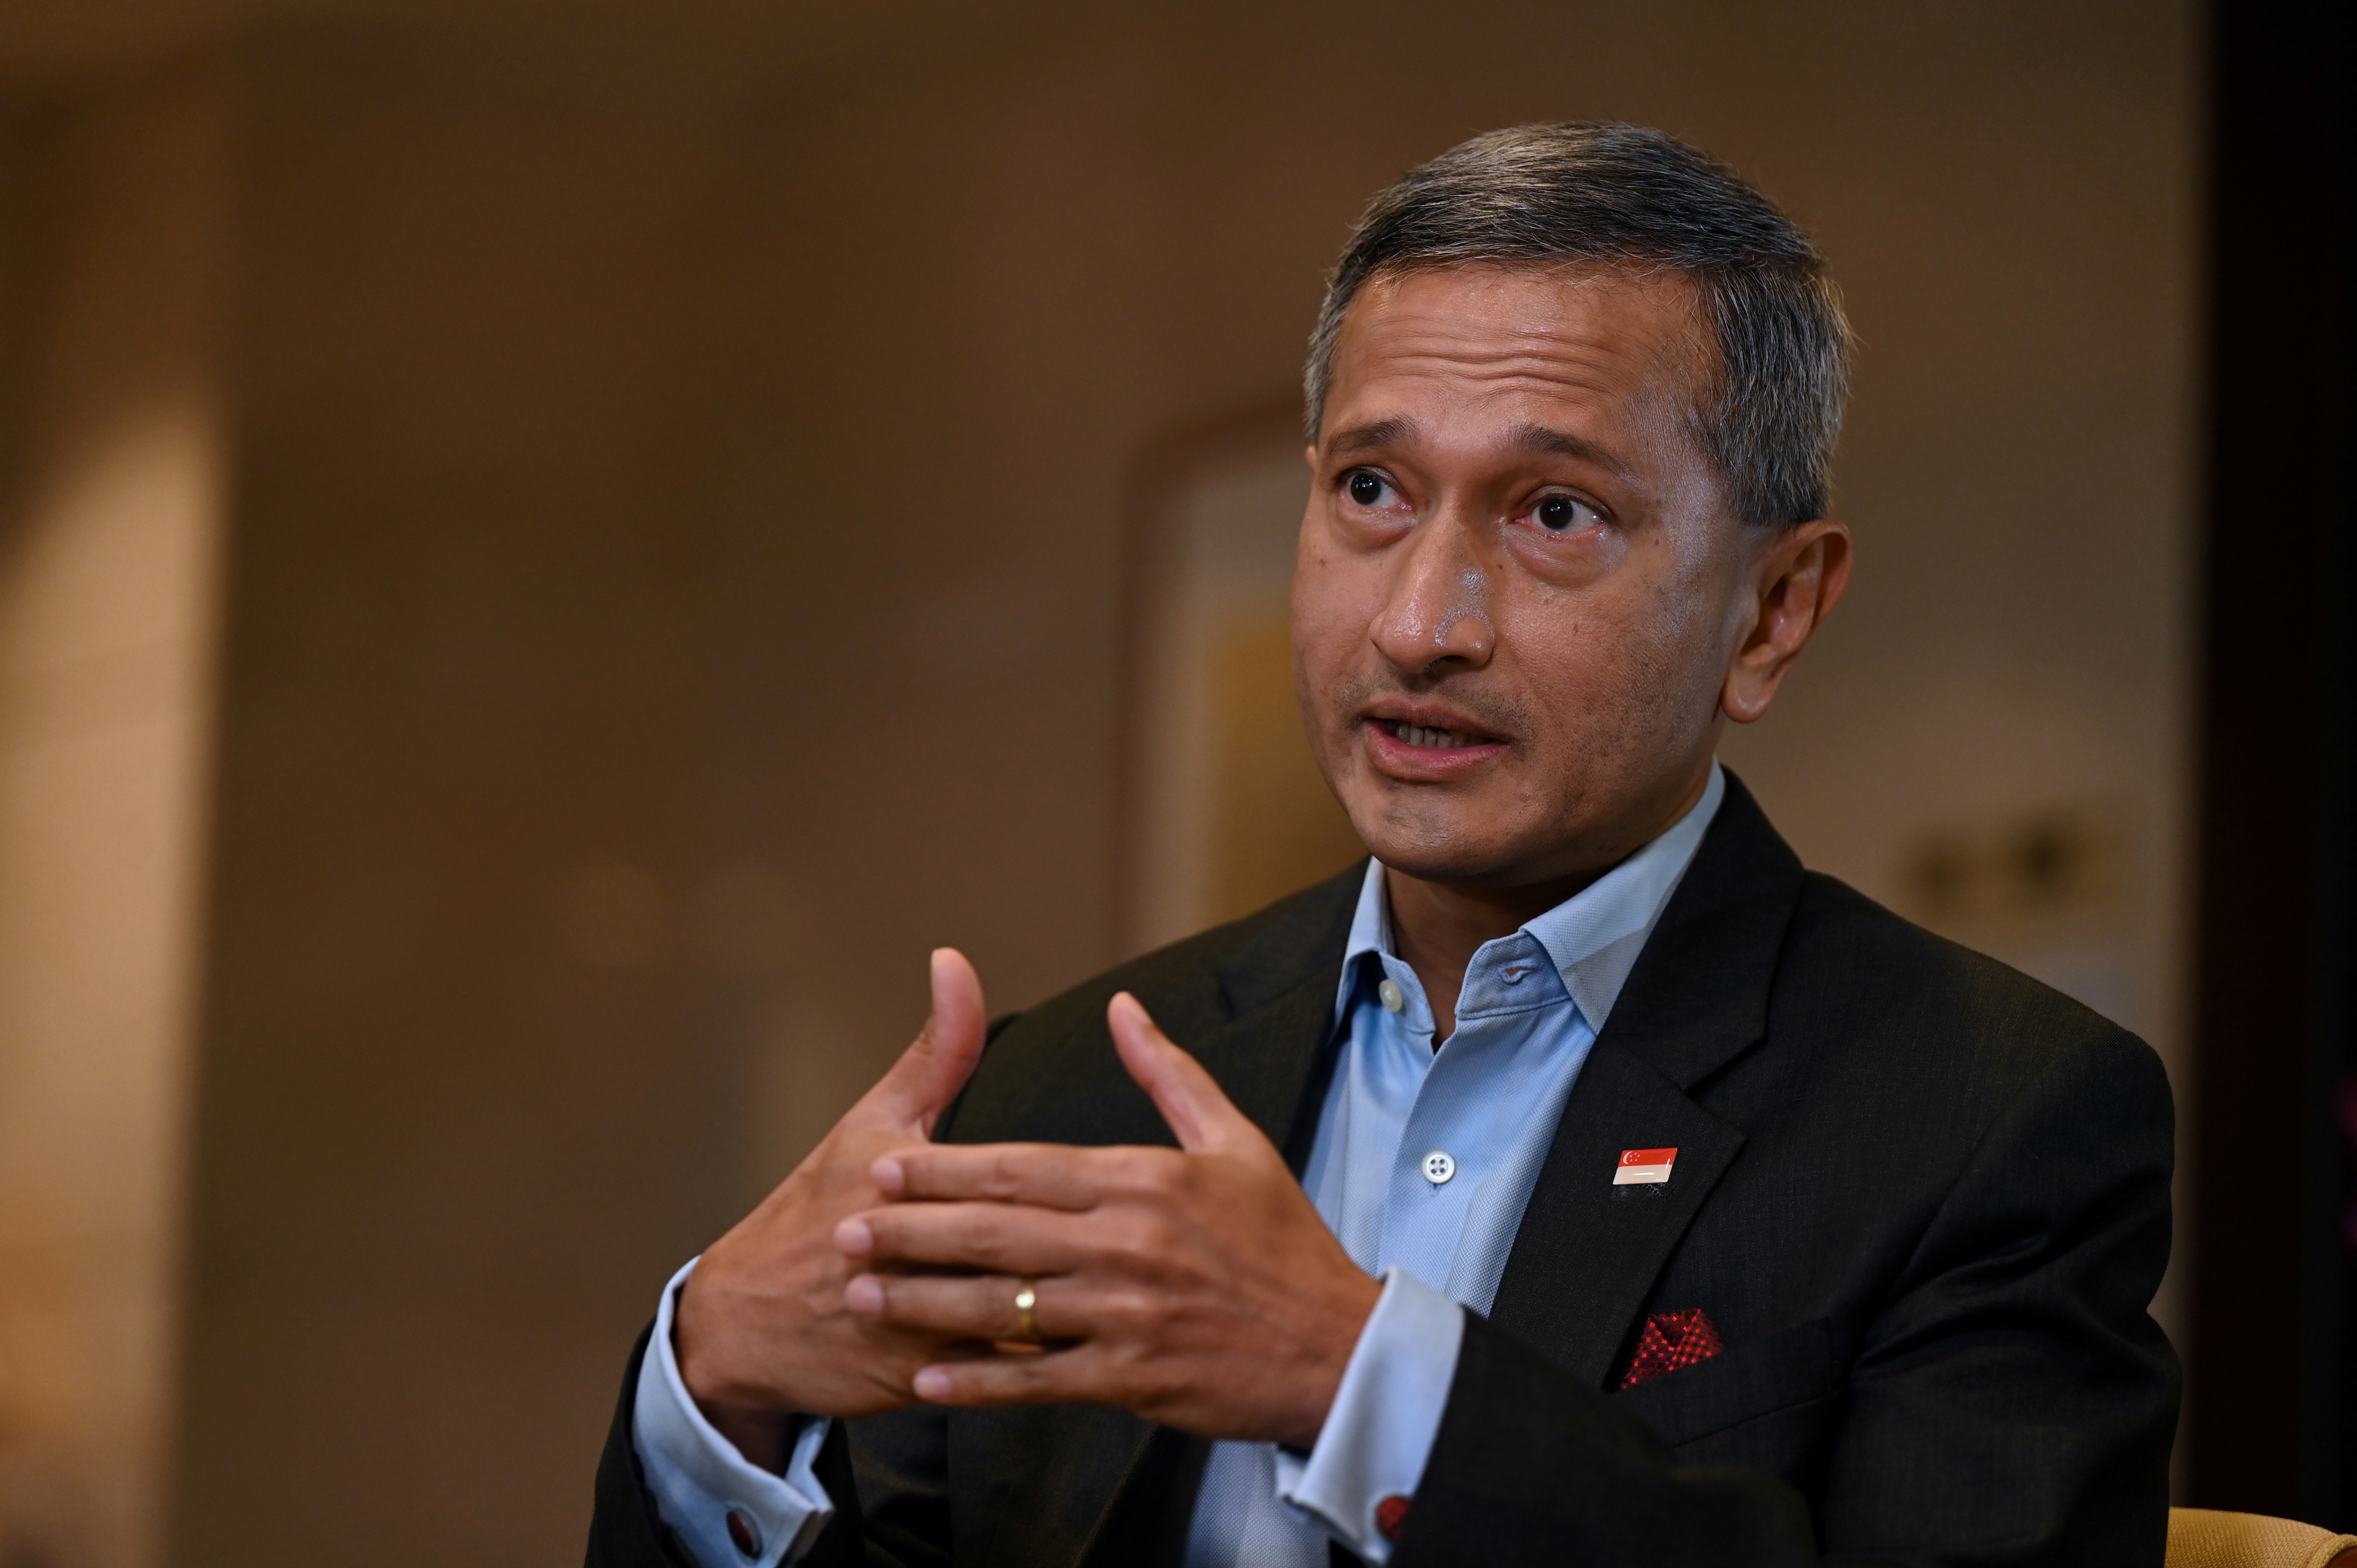 Singapore's Foreign Minister Balakrishnan during an interview at the Ministry of Foreign Affairs in Singapore